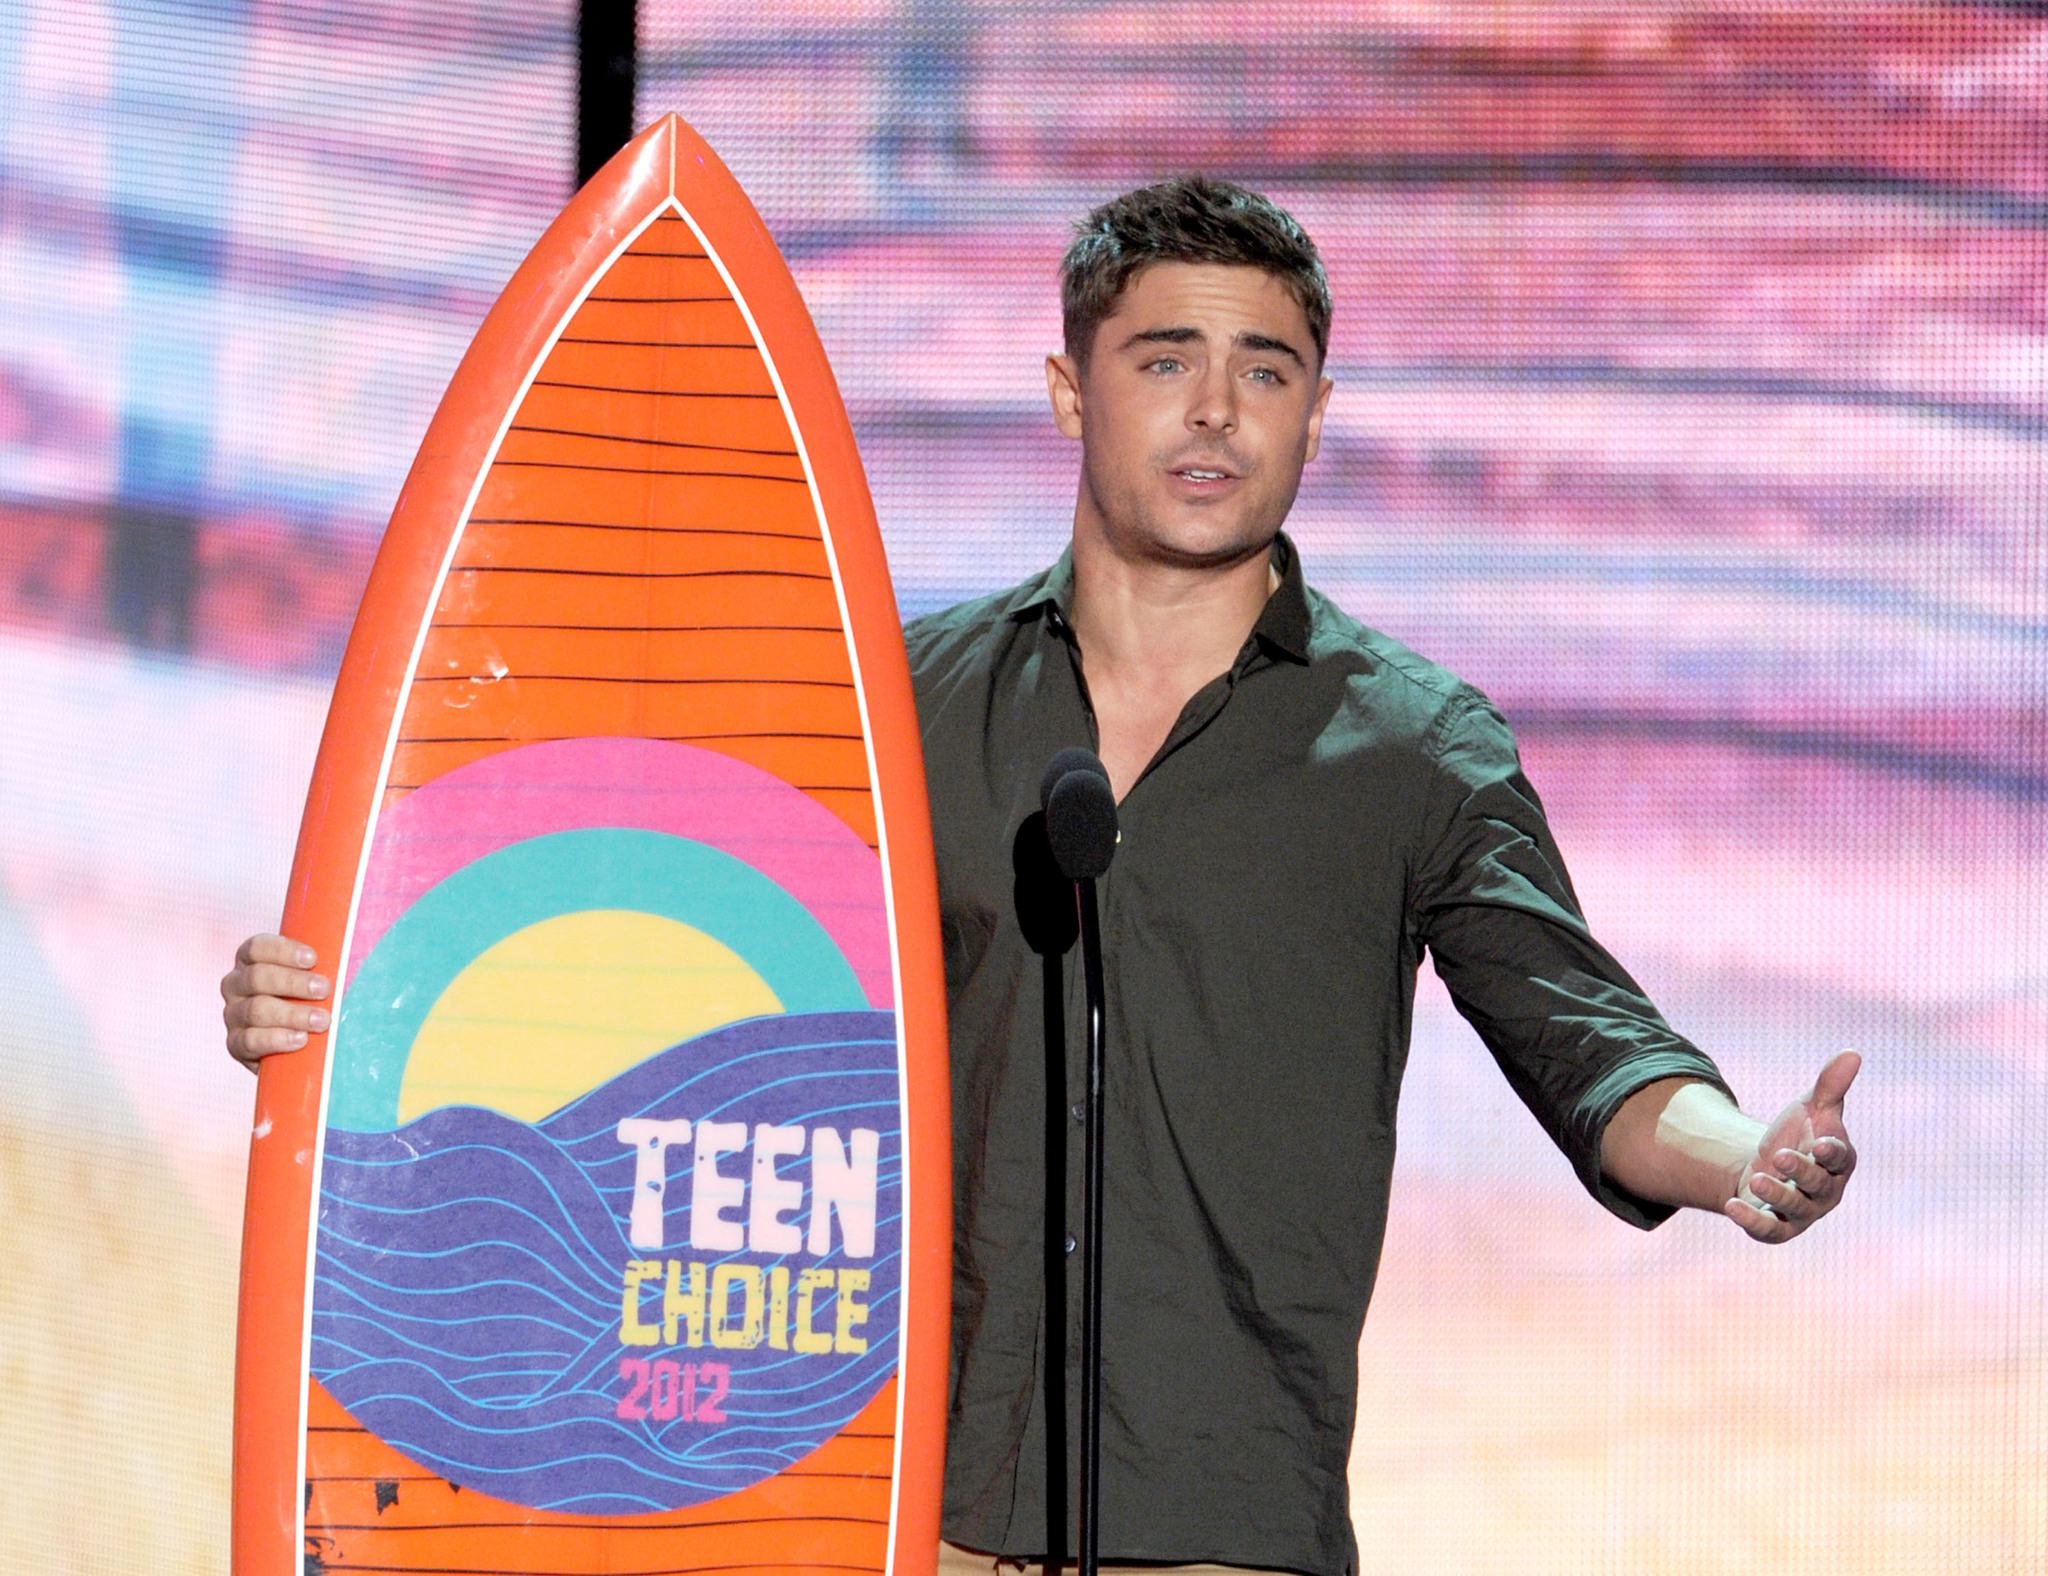 Zac Efron at event of Teen Choice Awards 2012 (2012)